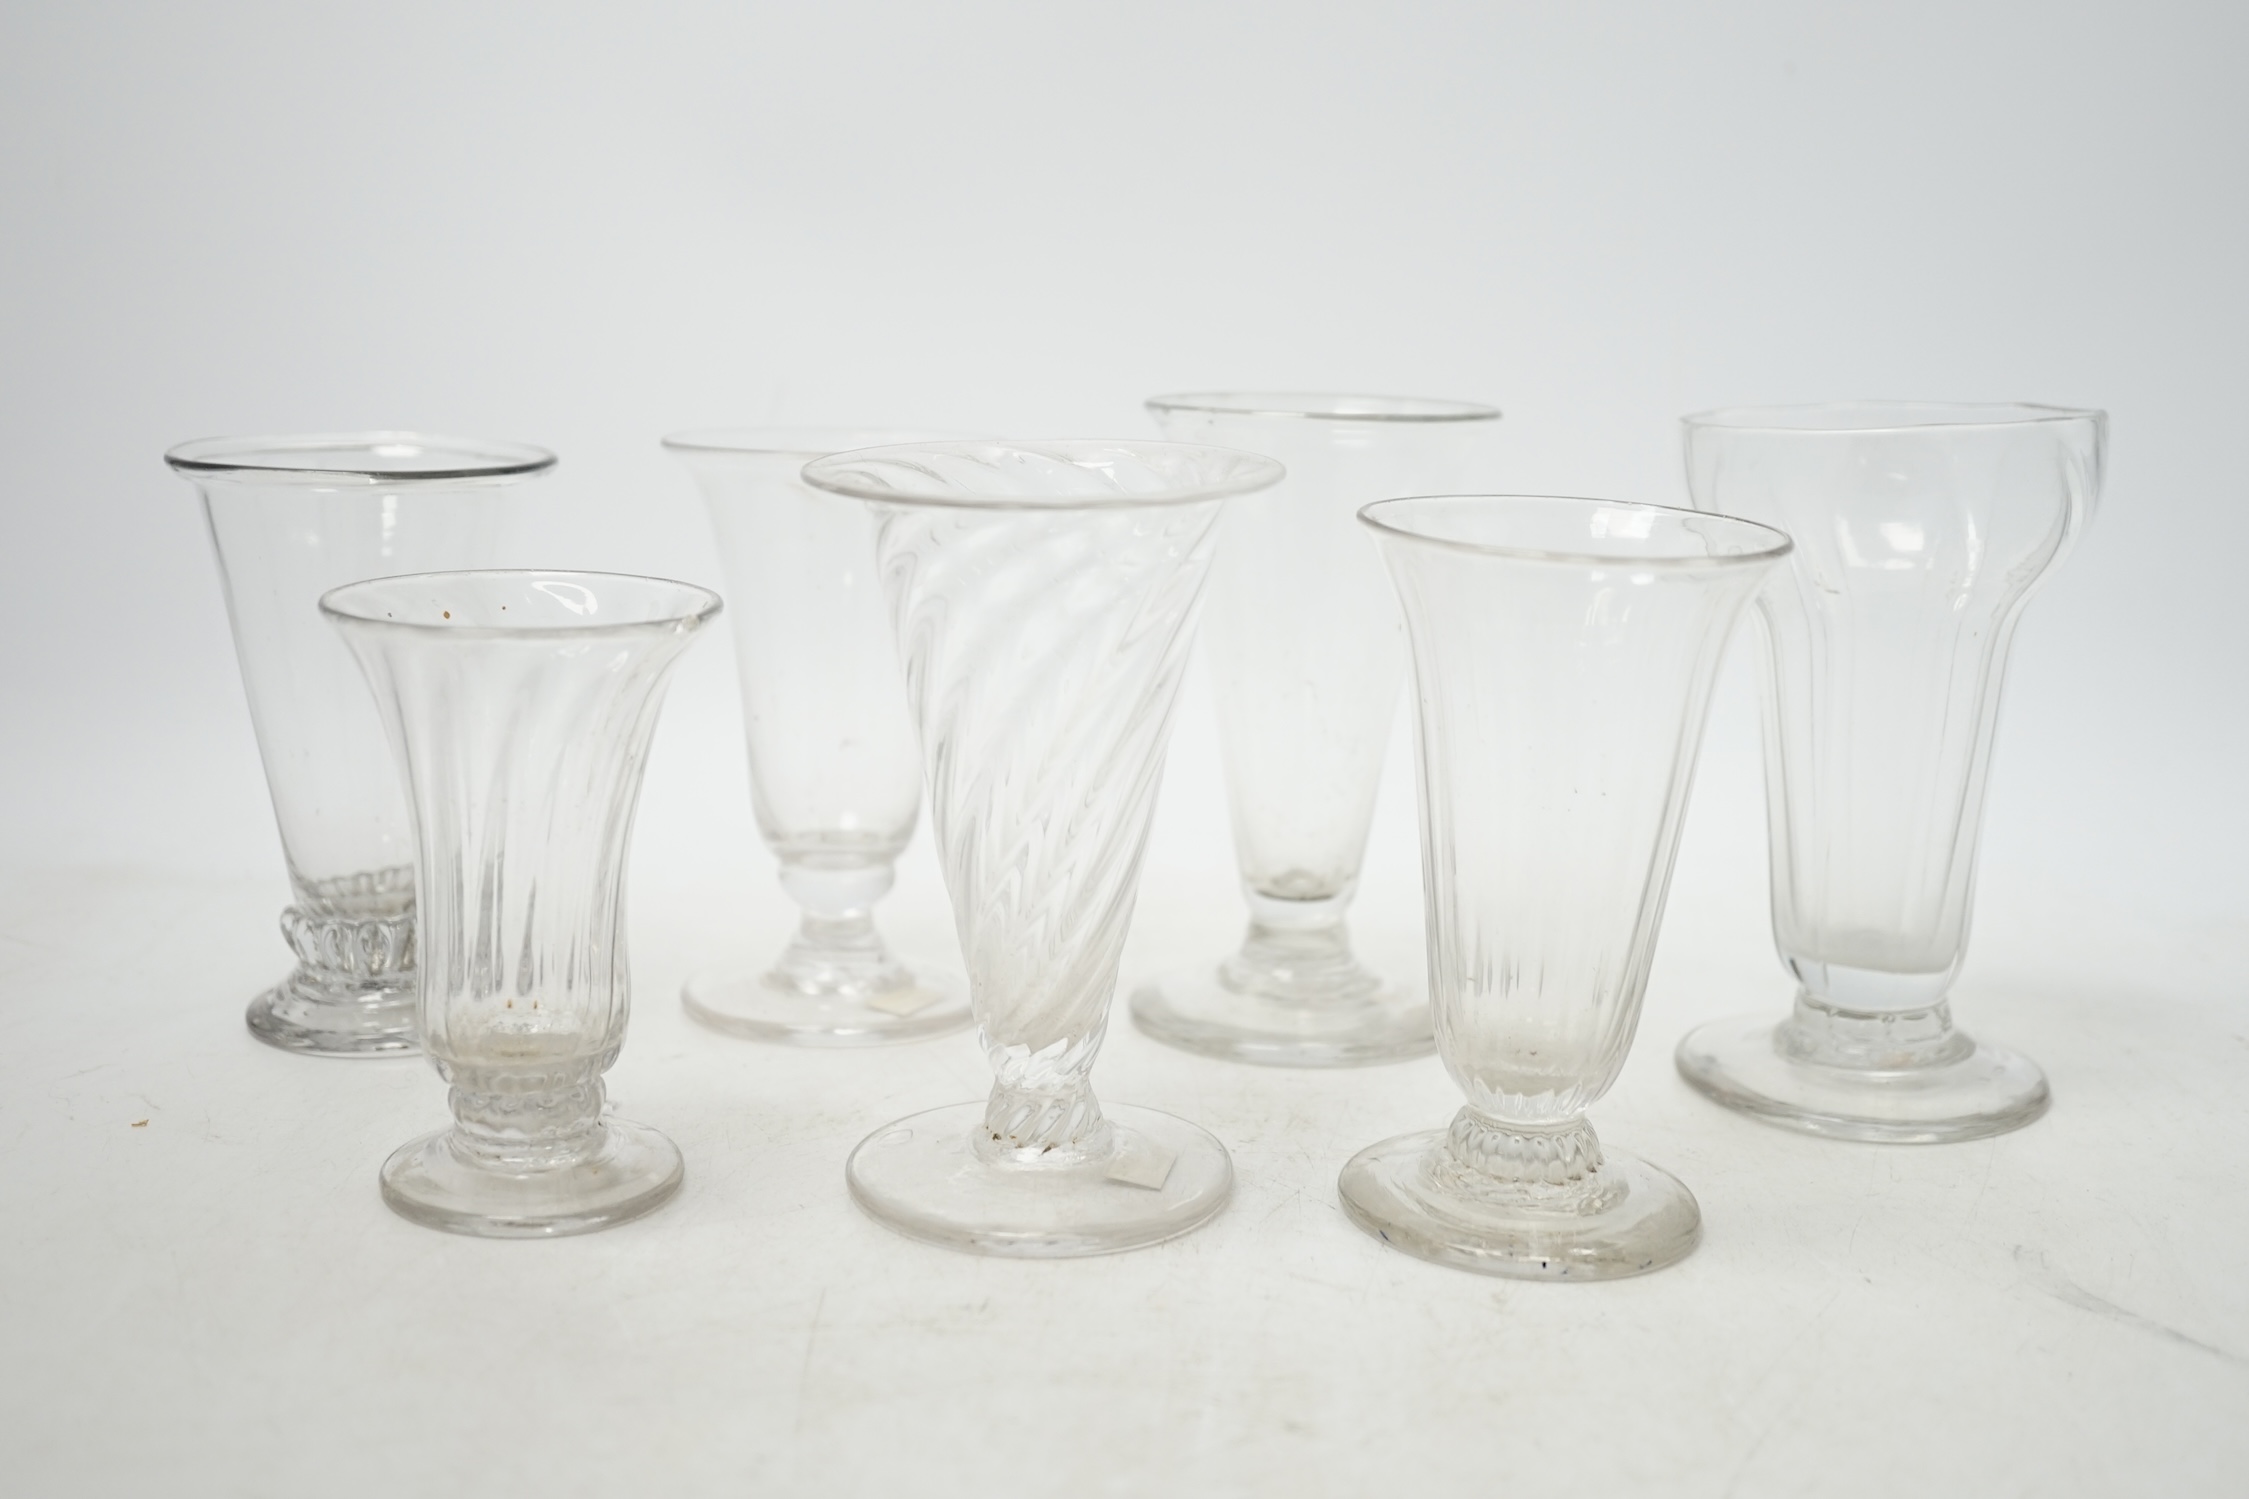 Seven 18th century jelly glasses, four with ribbed bowls, tallest 11.5cm. Condition - fair to good, chip to the rim of one and faults in the blowing.